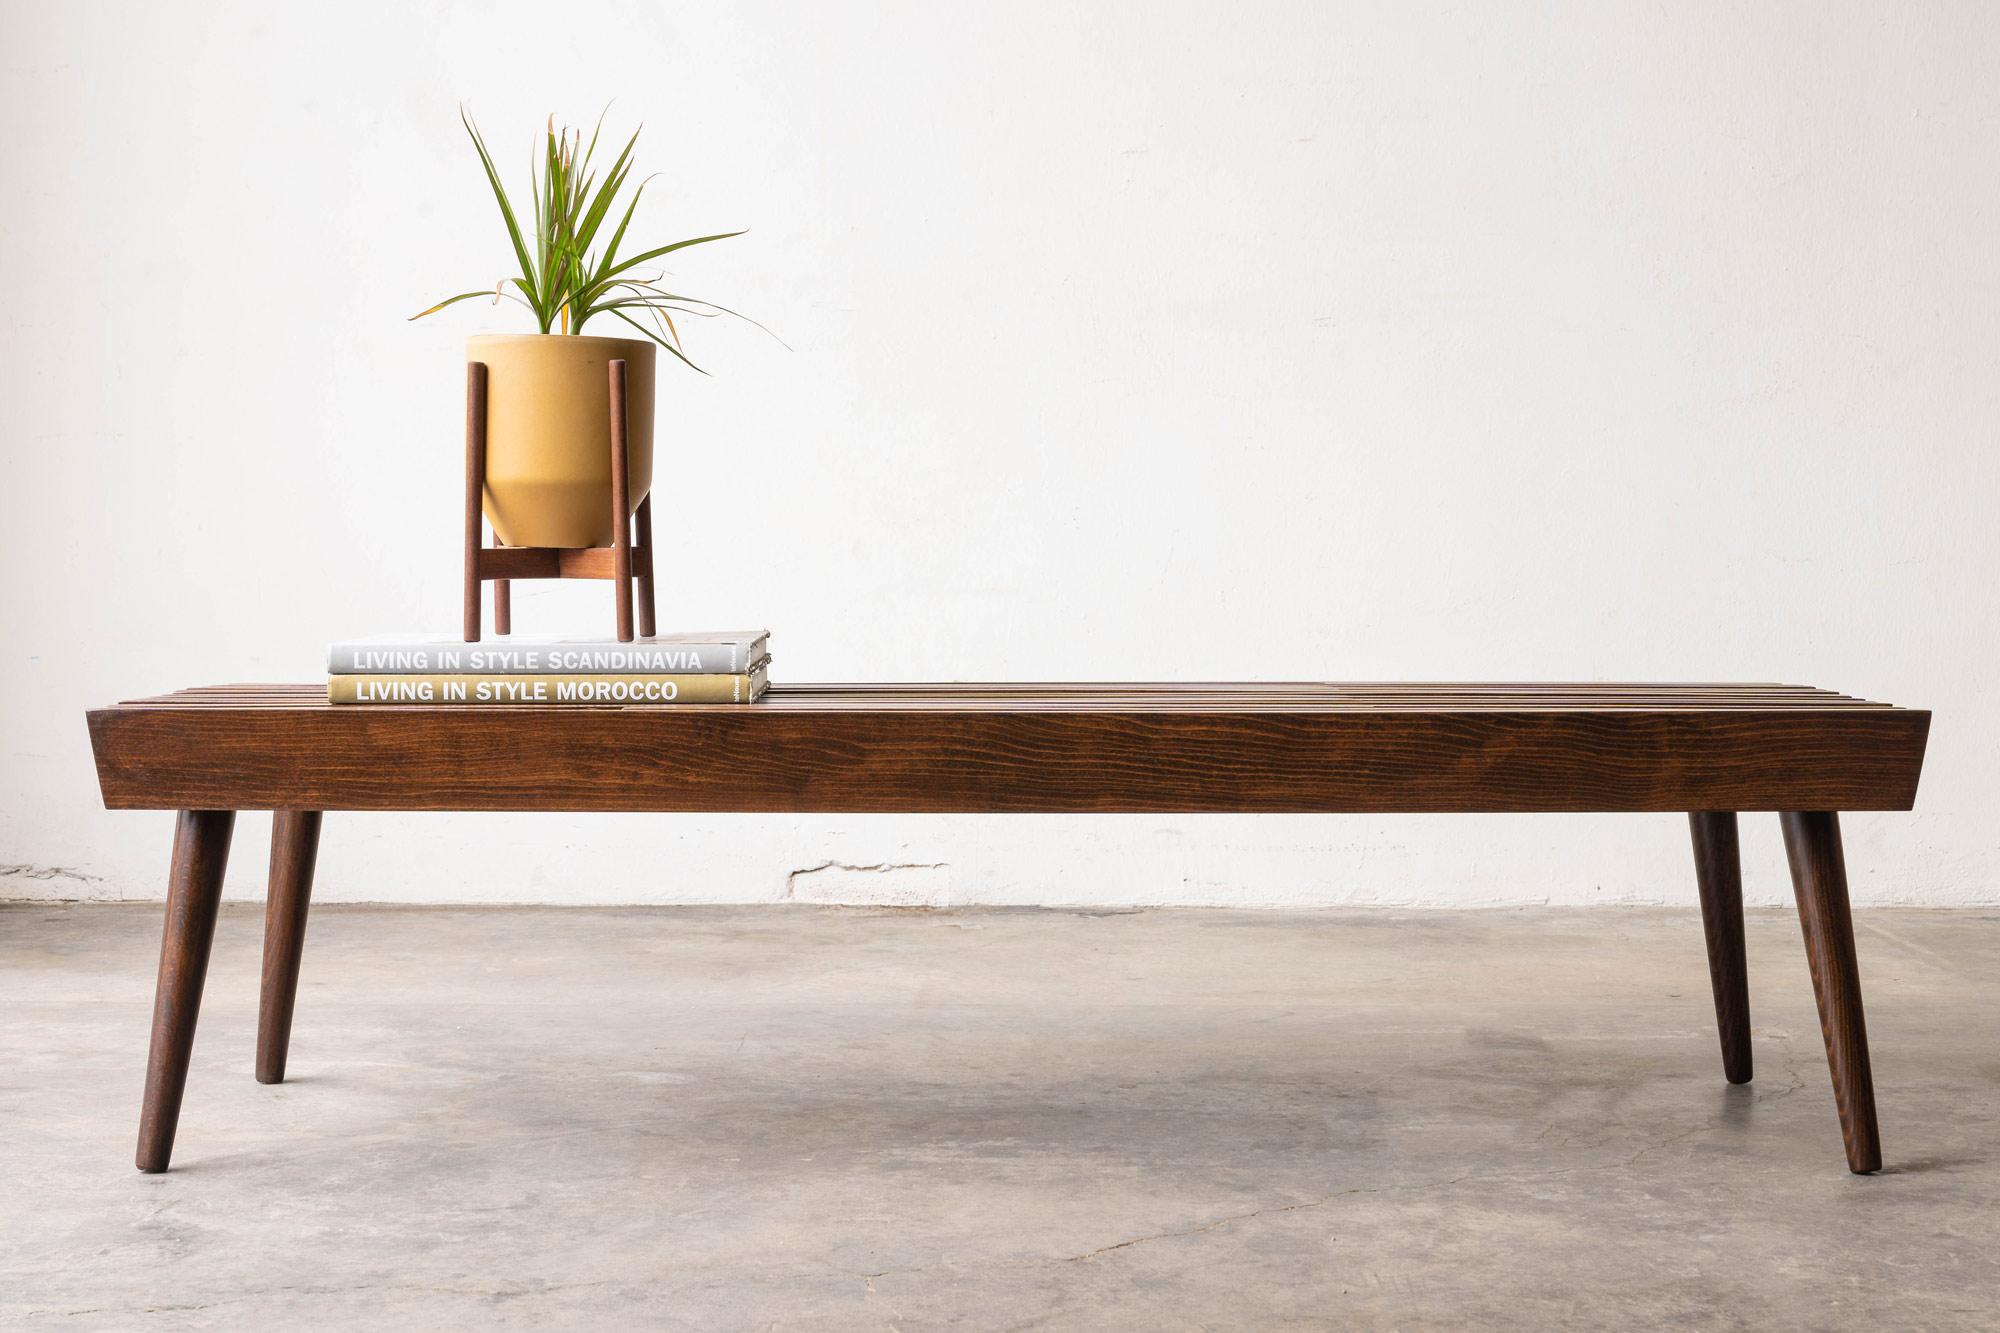 Introducing this stunning Mid-Century Modern bench, inspired by the iconic George Nelson! With its sleek design, adjustable slats, and tapered legs, this bench is not only functional but also a work of art. The unique intertwined design allows for